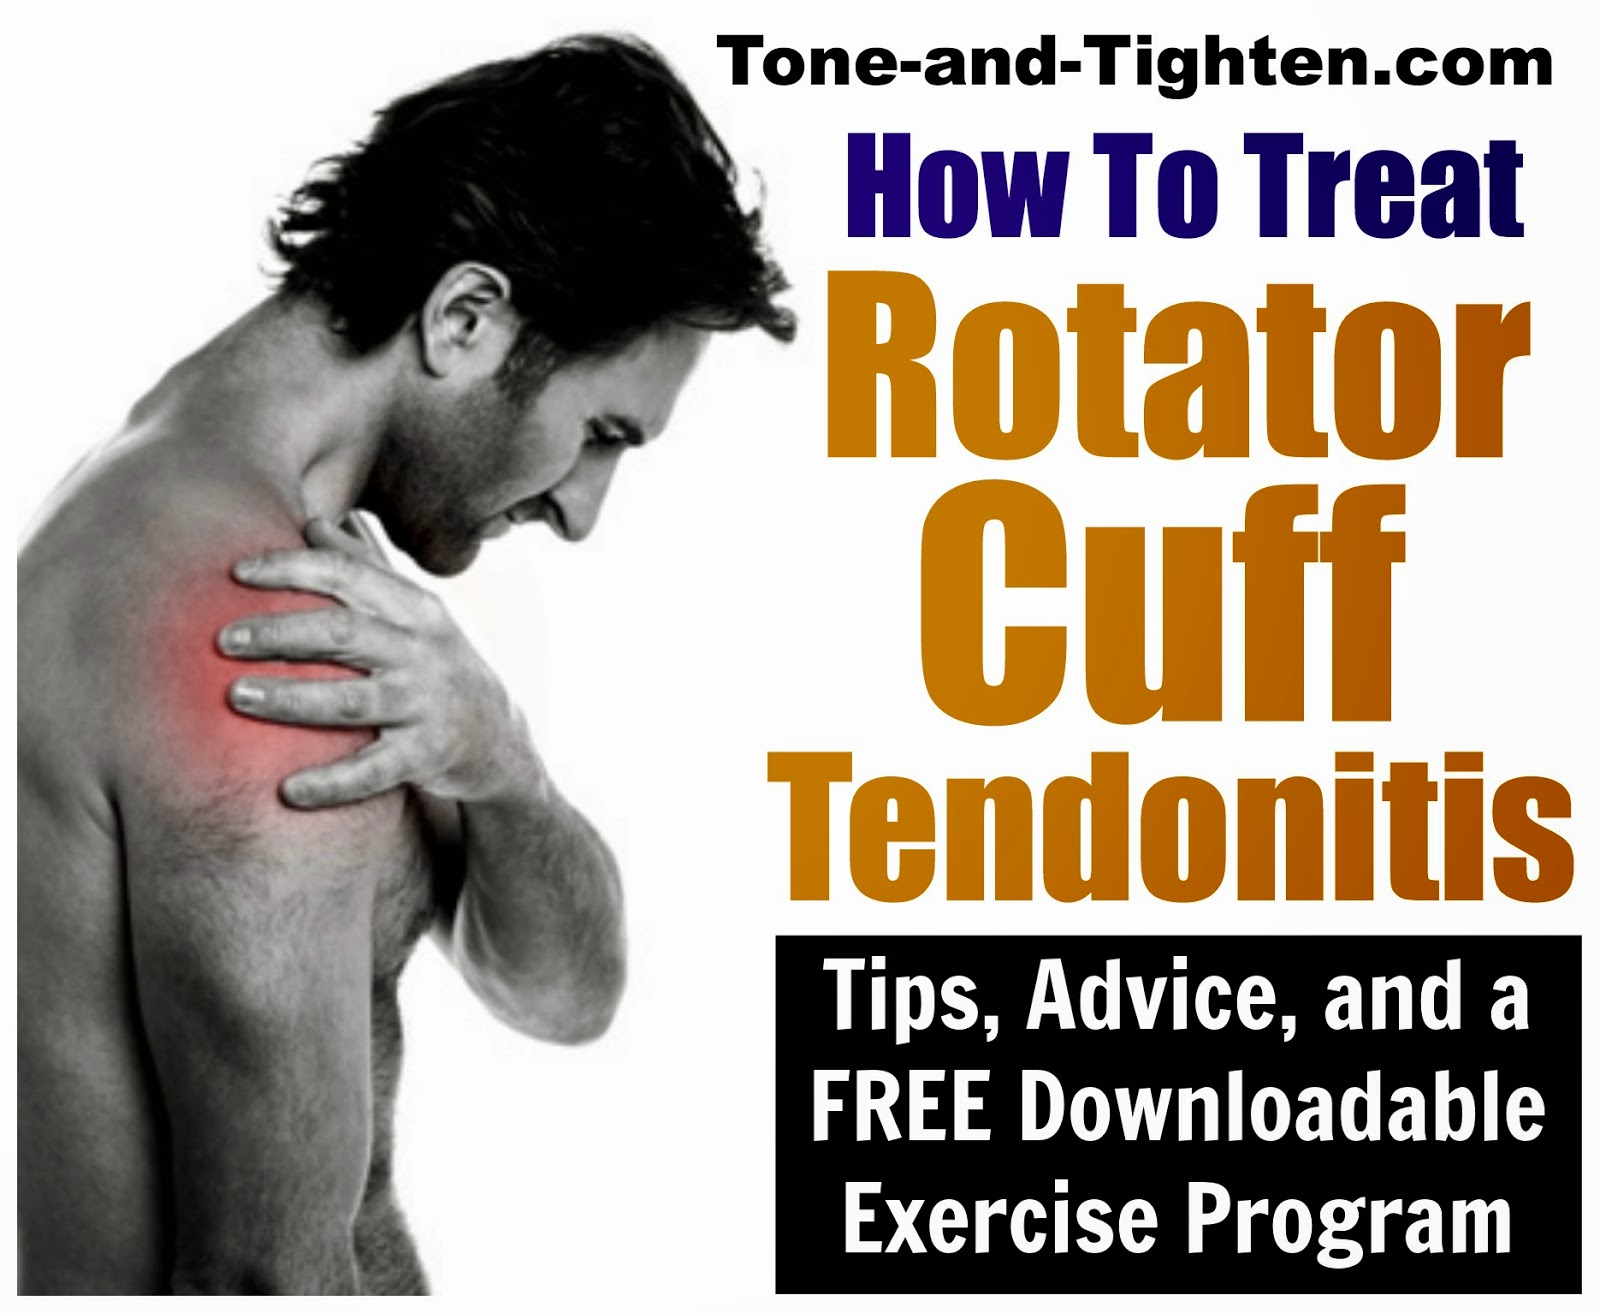 Feel Better Now Series – Best home exercises for rotator cuff tendonitis PART 2